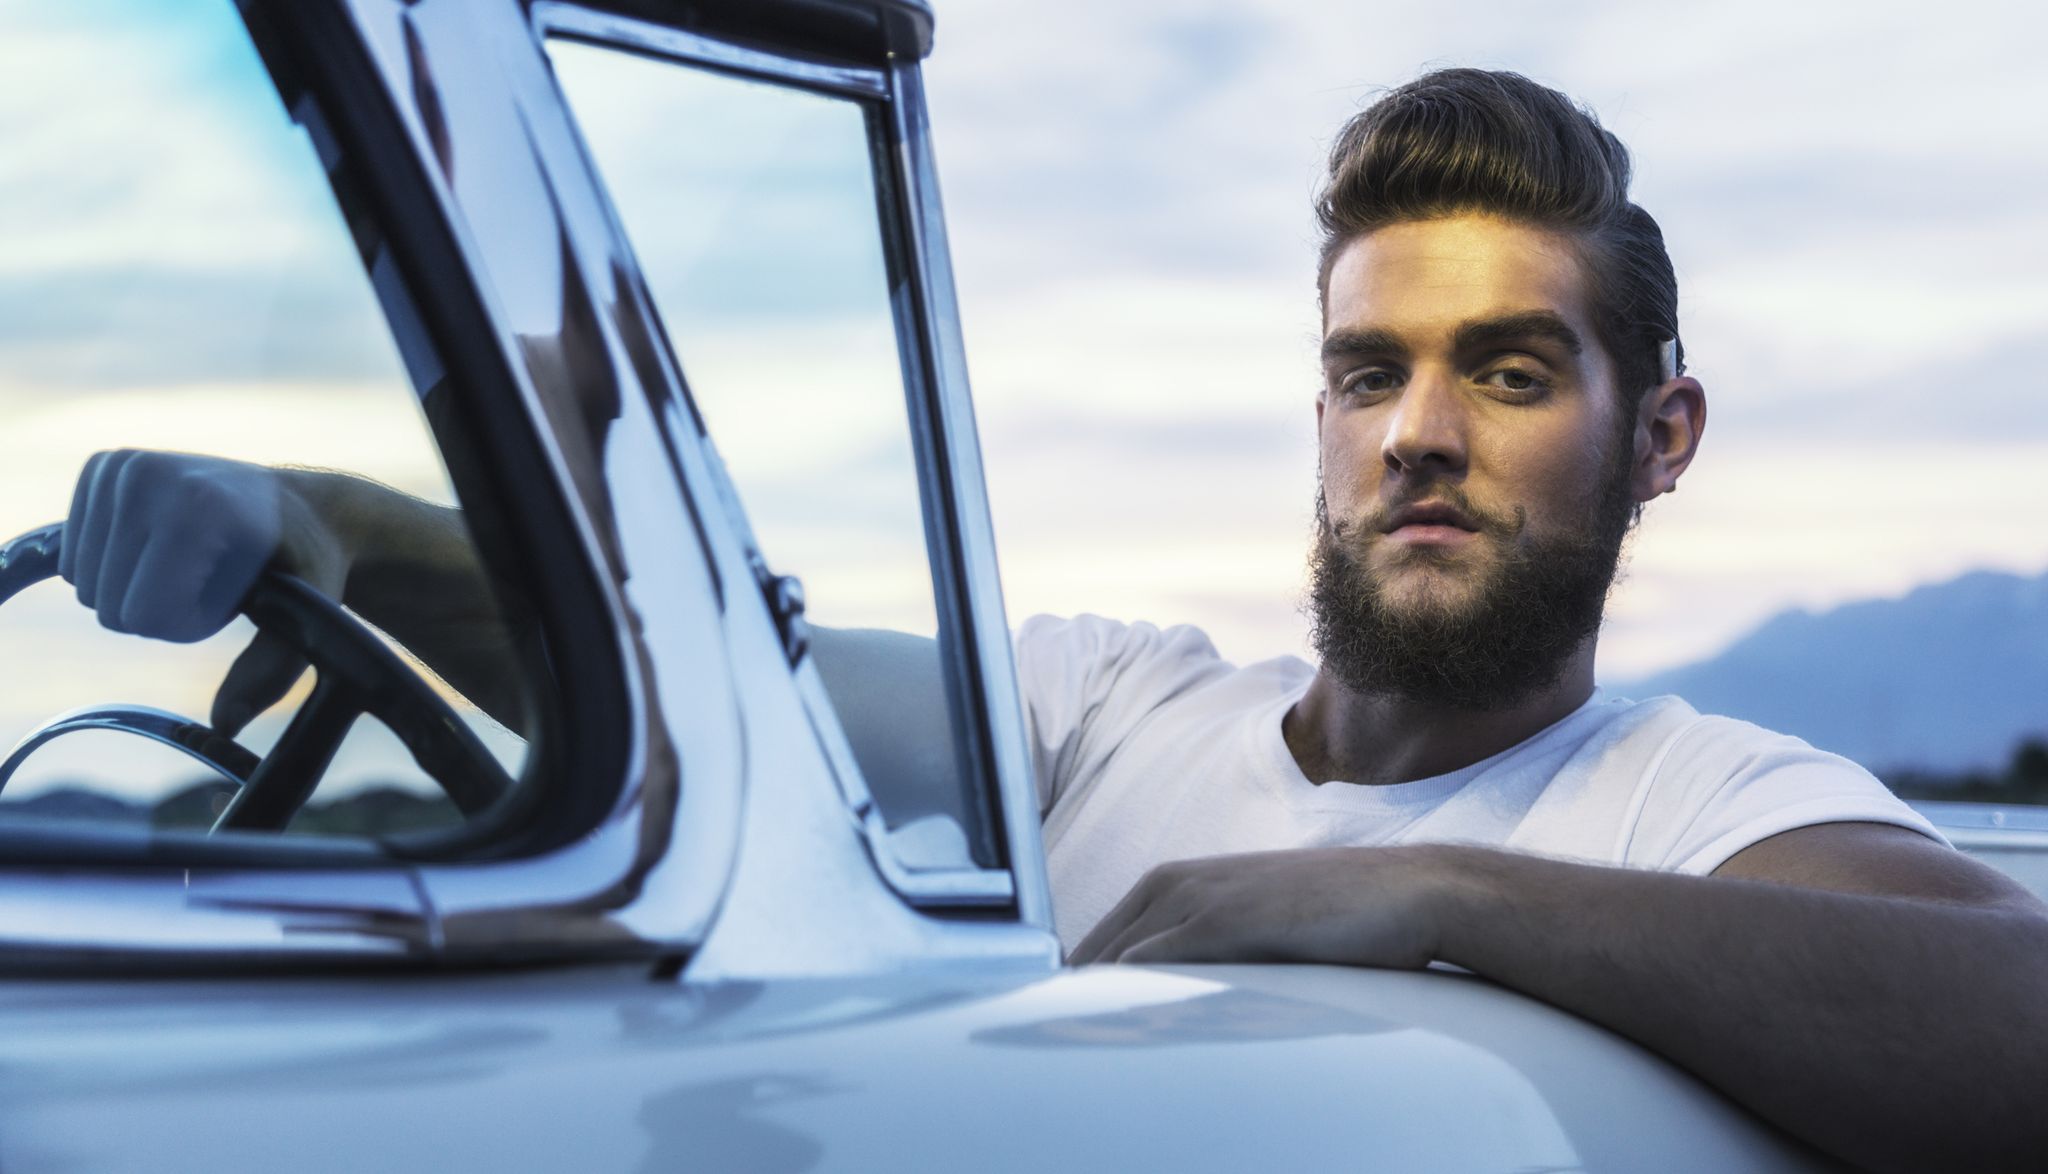 Facial hair, Vehicle, Automotive exterior, Muscle, Automotive design, Beard, Boating, Truck driver, Vacation, Vehicle door, 